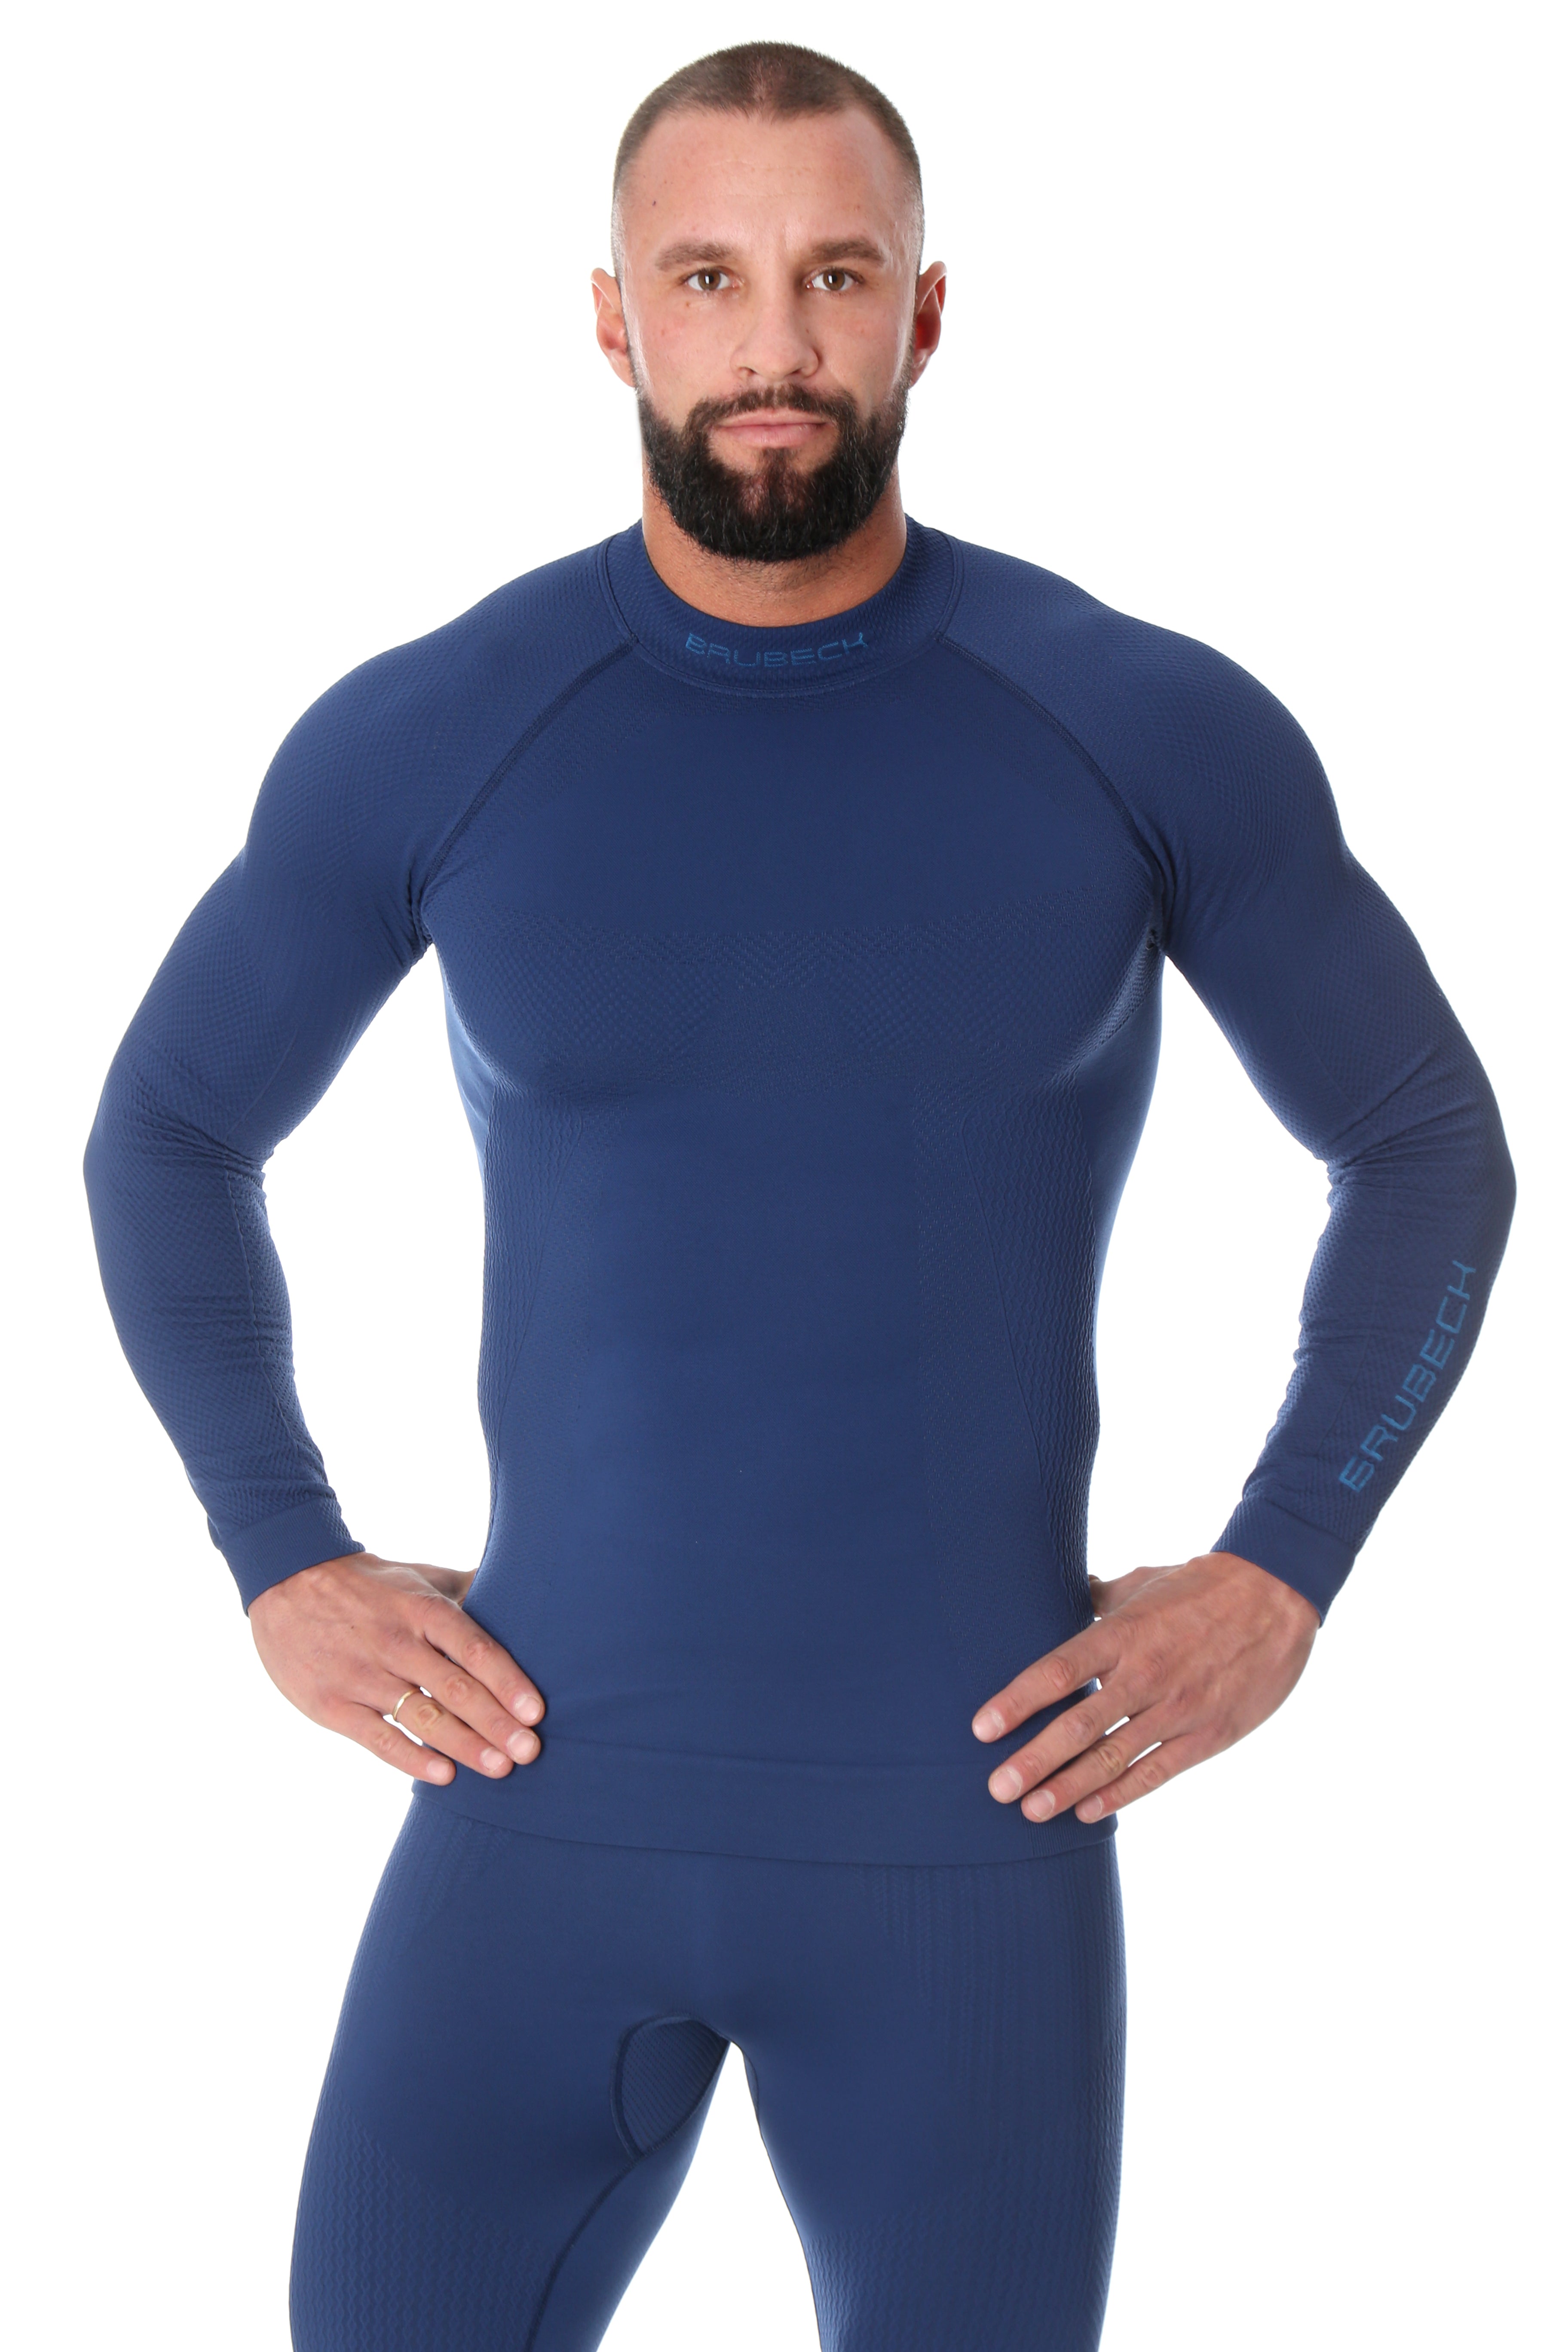 Men's Midweight Base Layer Extreme Thermo Long Sleeve